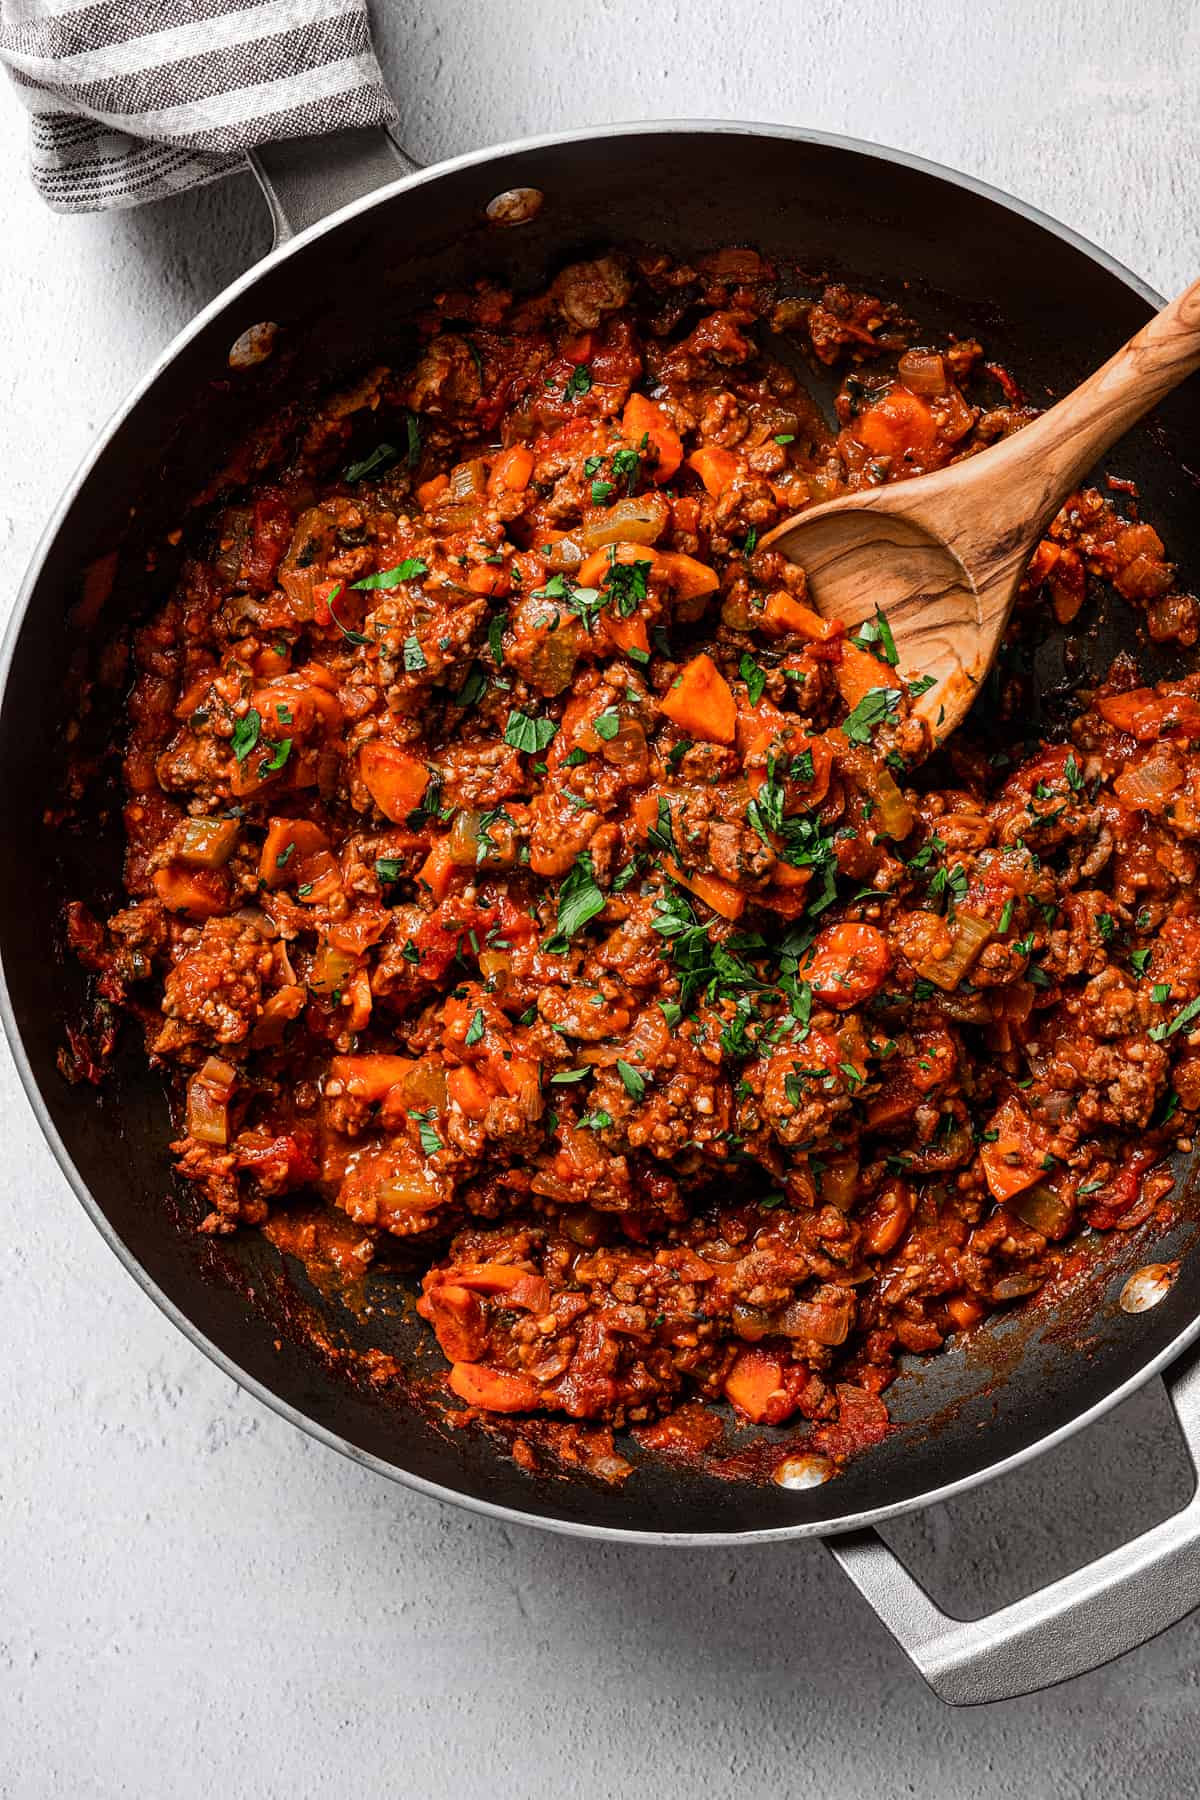 Meat sauce in a skillet.